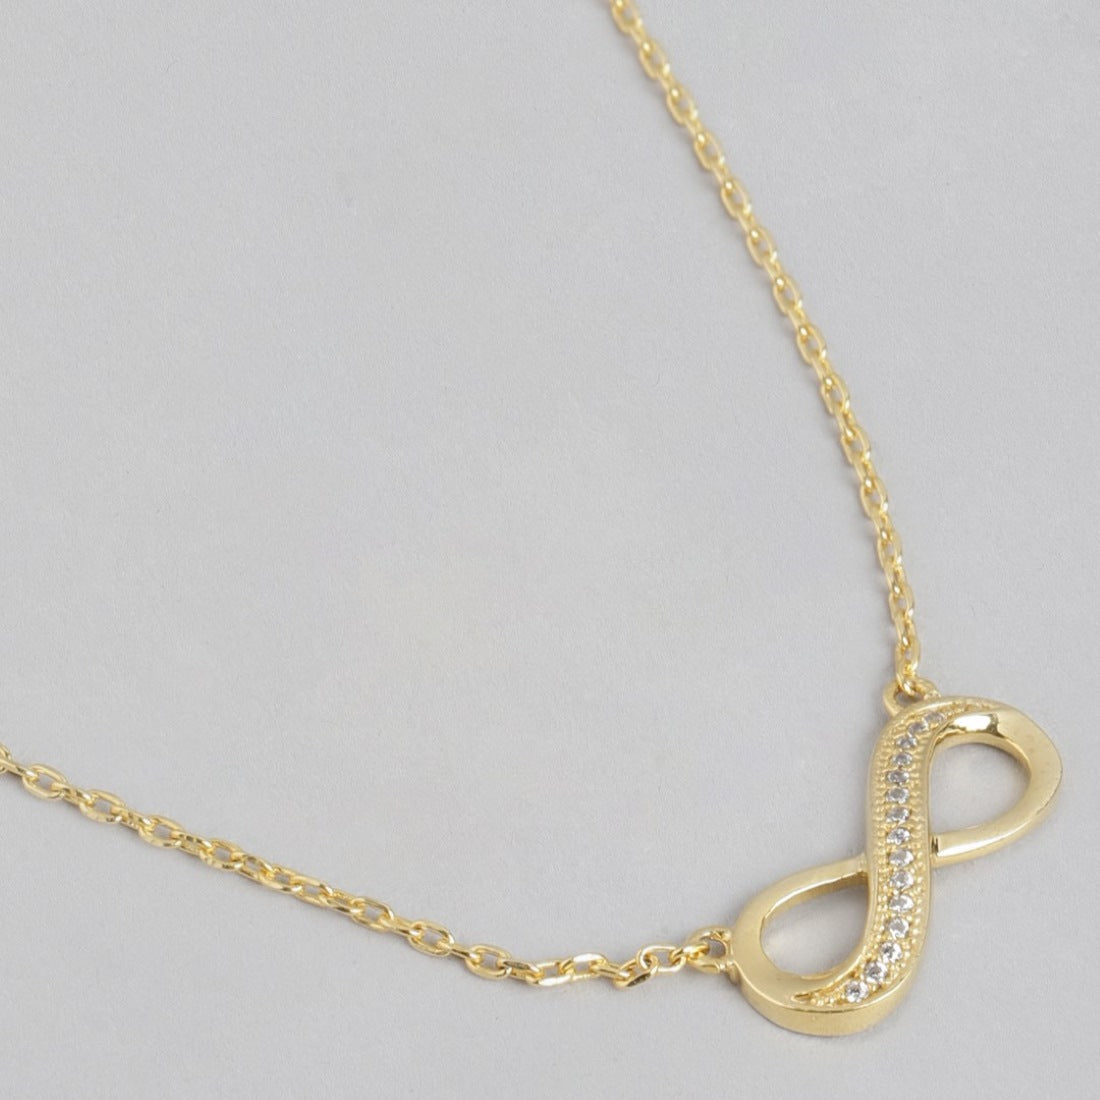 Infinite Love Embodied Gold-Plated Cubic Zirconia 925 Sterling Silver Necklace